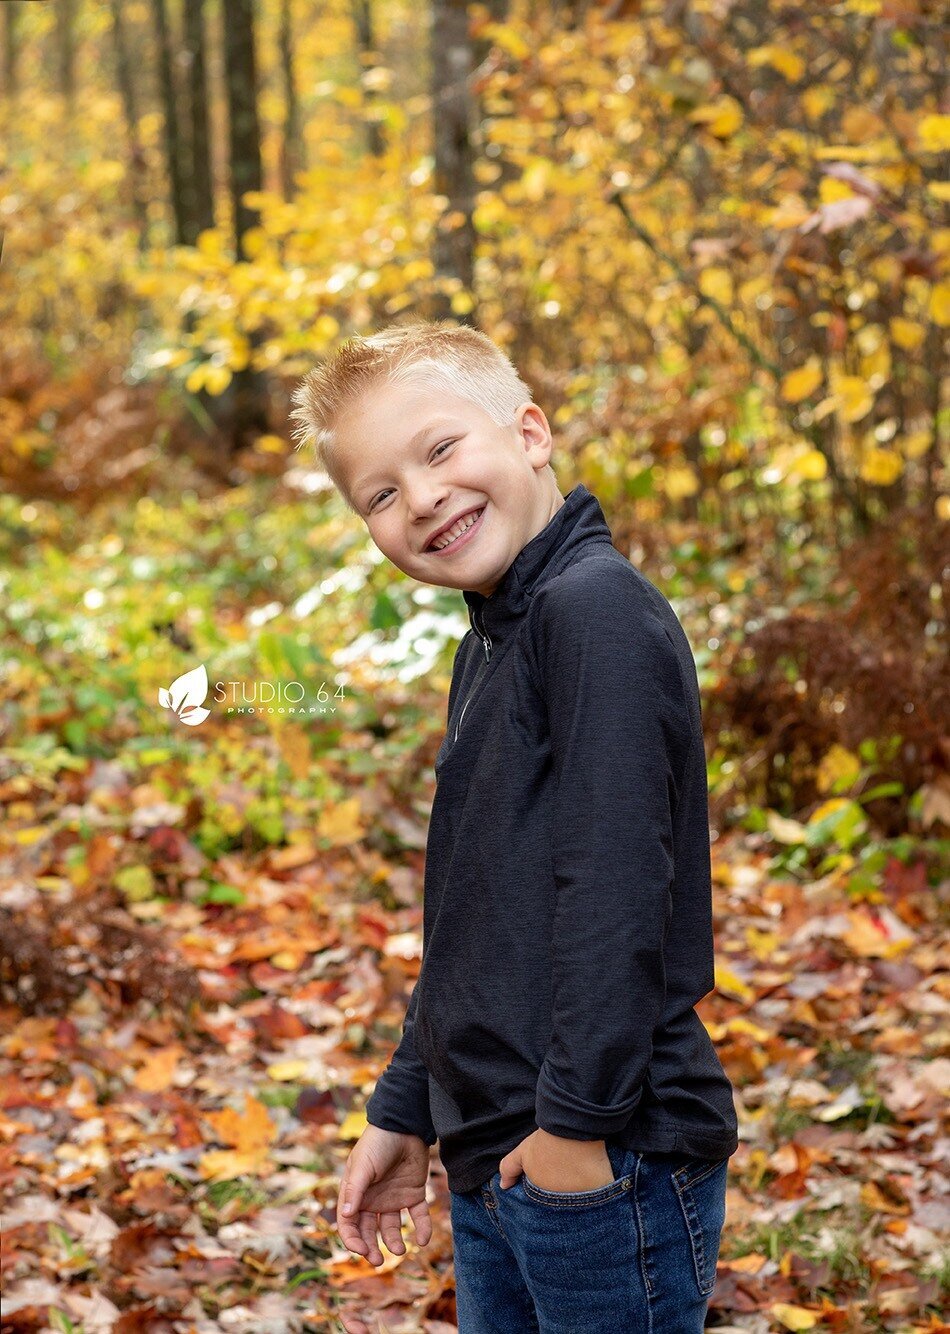 A young boy smiles candidly outdoors with the fall colors surrounding him.